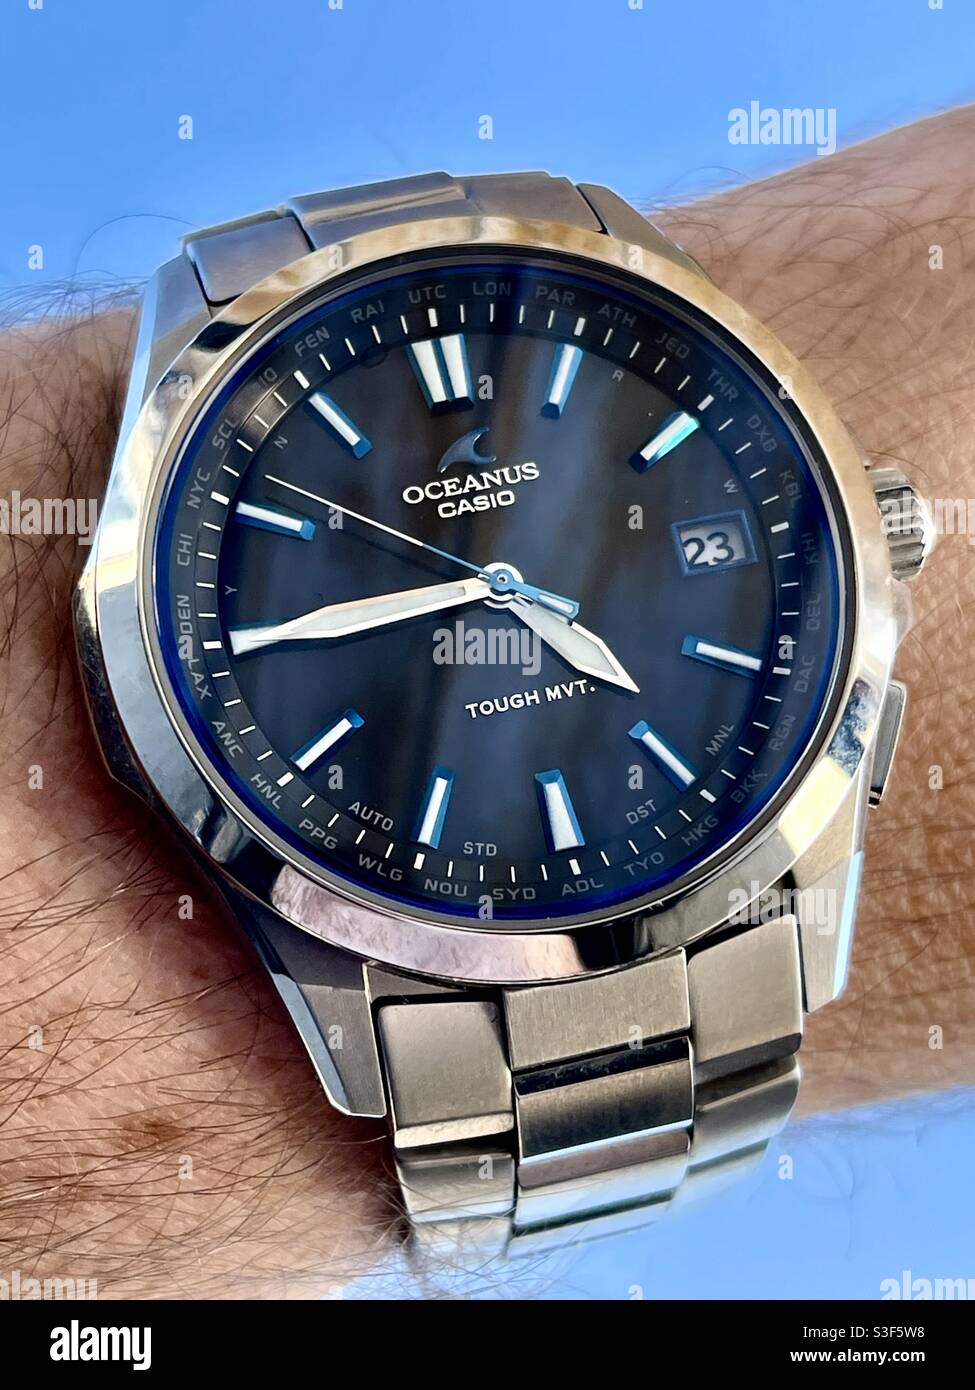 Casio S100 solar atomic titanium wrist watch with black dial, polished Chrome bezel and blue accents on a blue sky Stock Photo Alamy